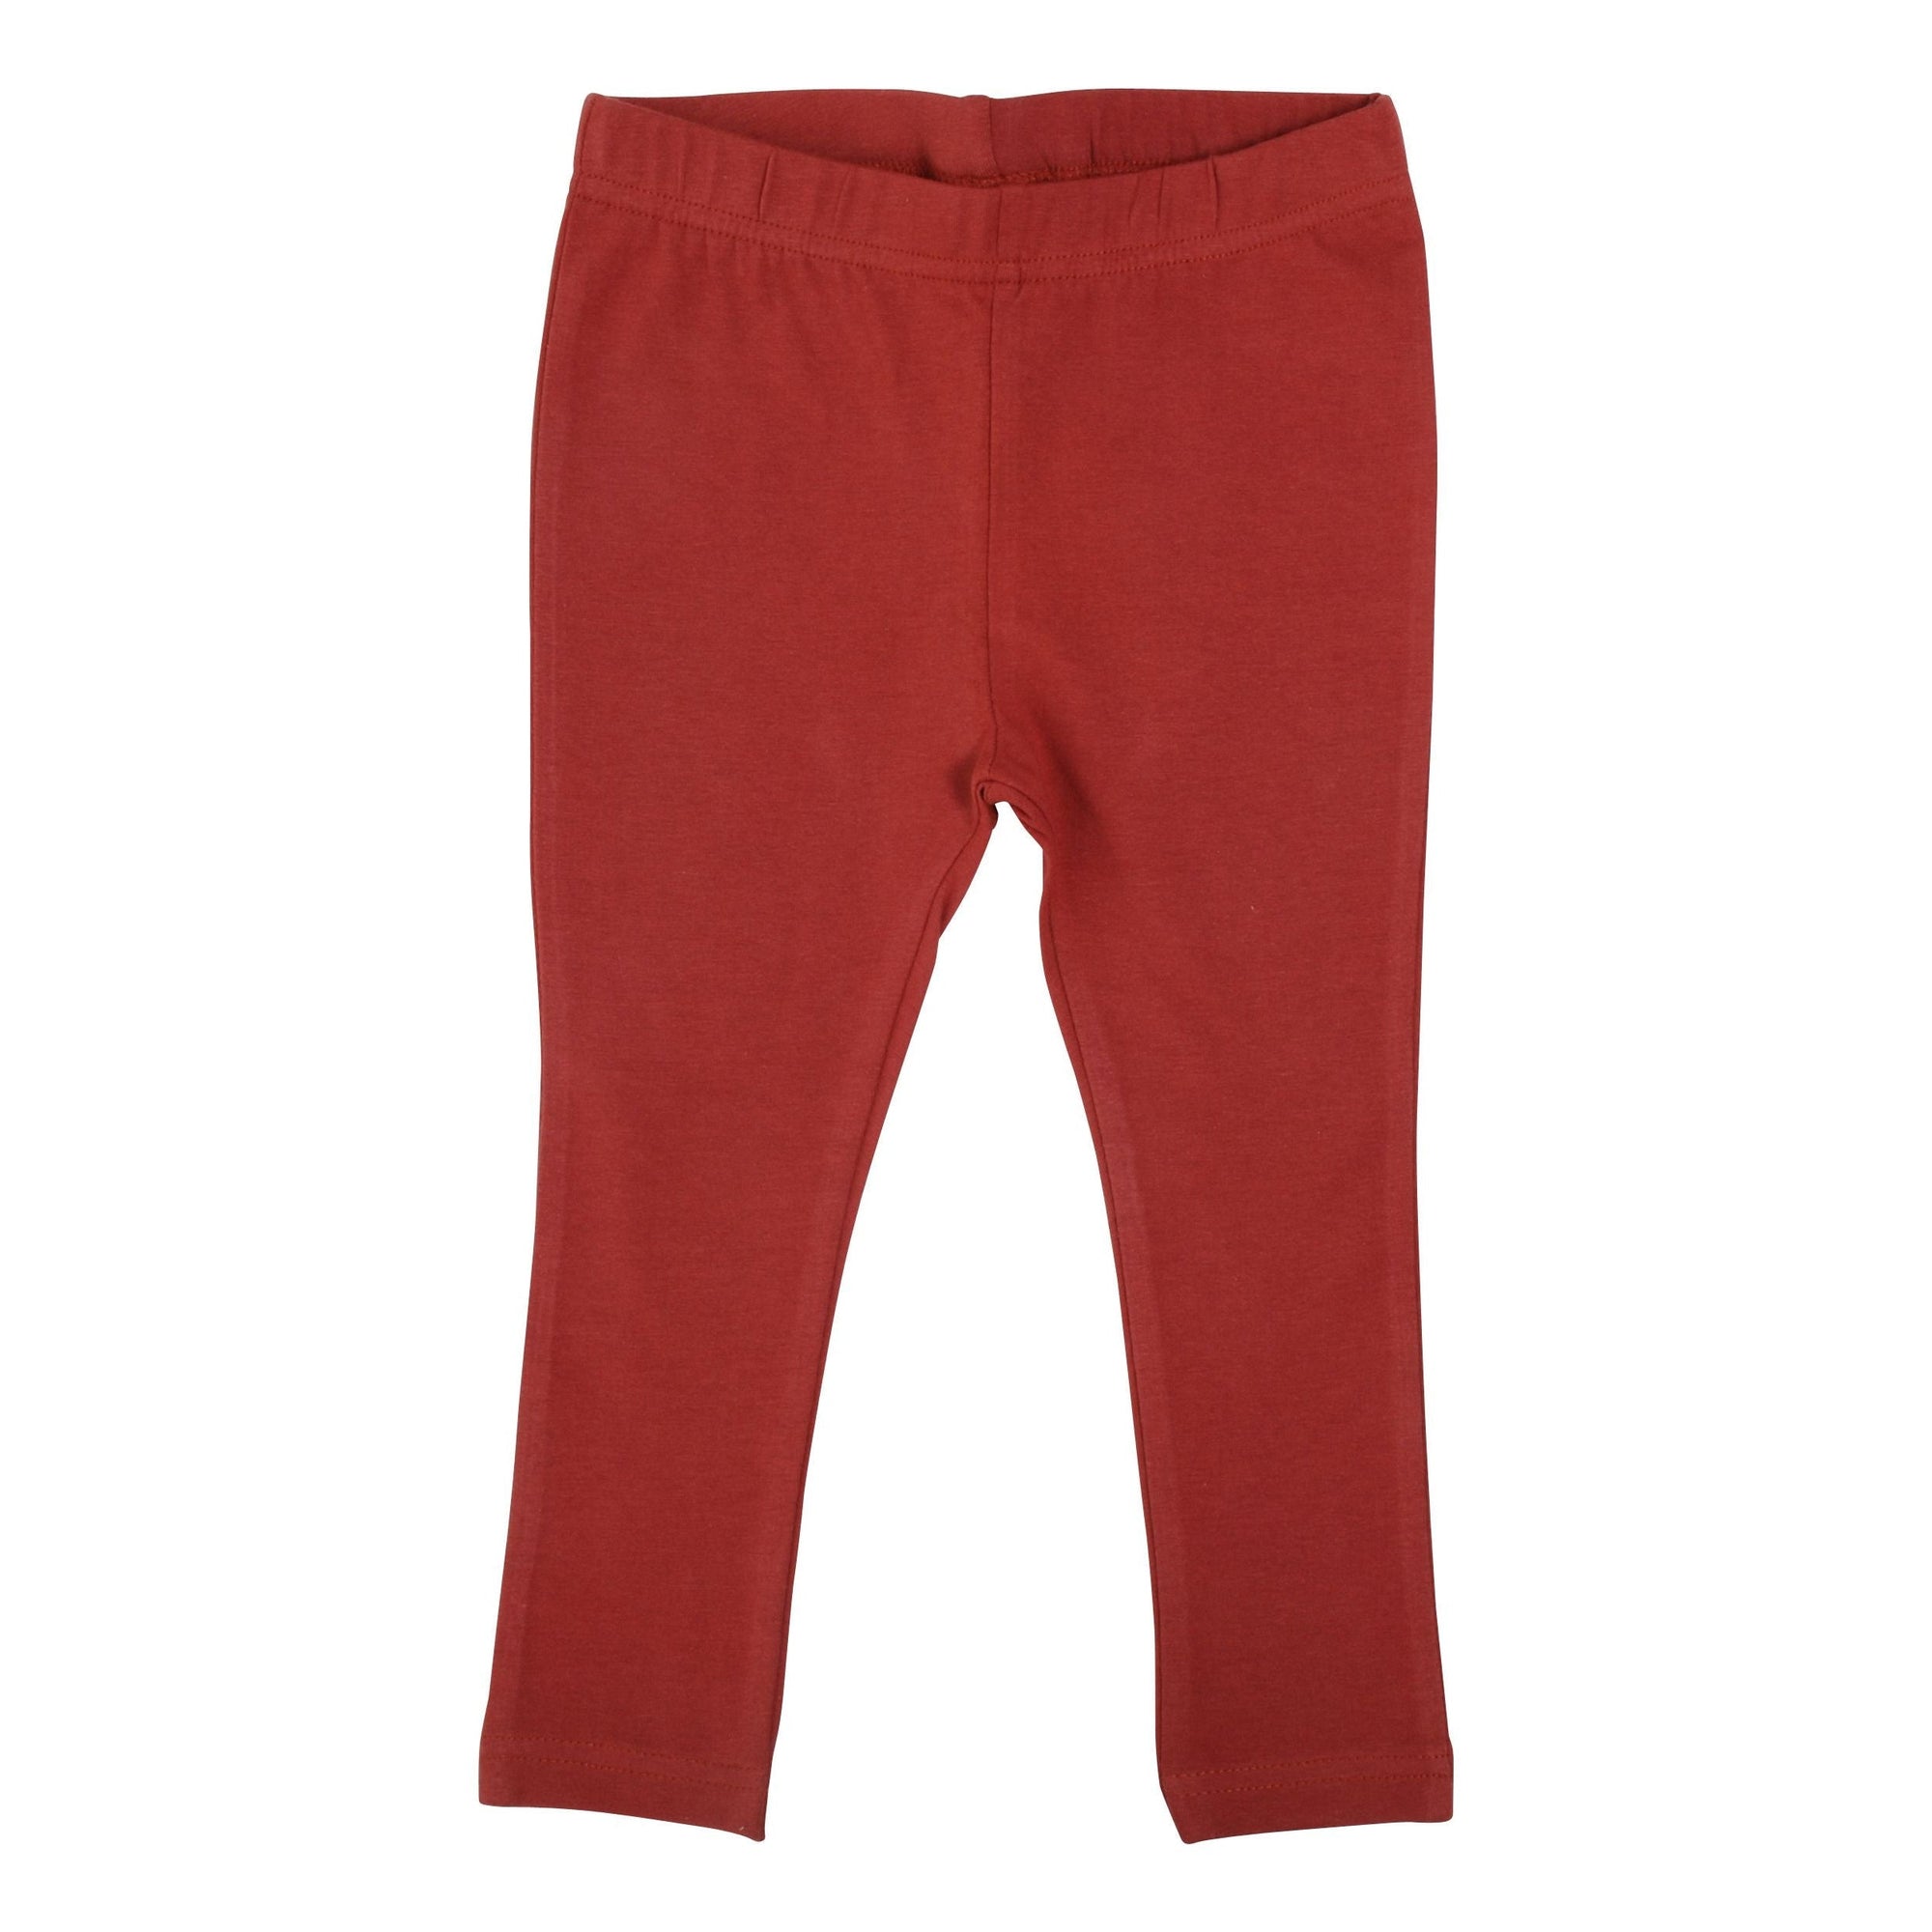 Brick Red Leggings - 2 Left Size 12-14 years-More Than A Fling-Modern Rascals